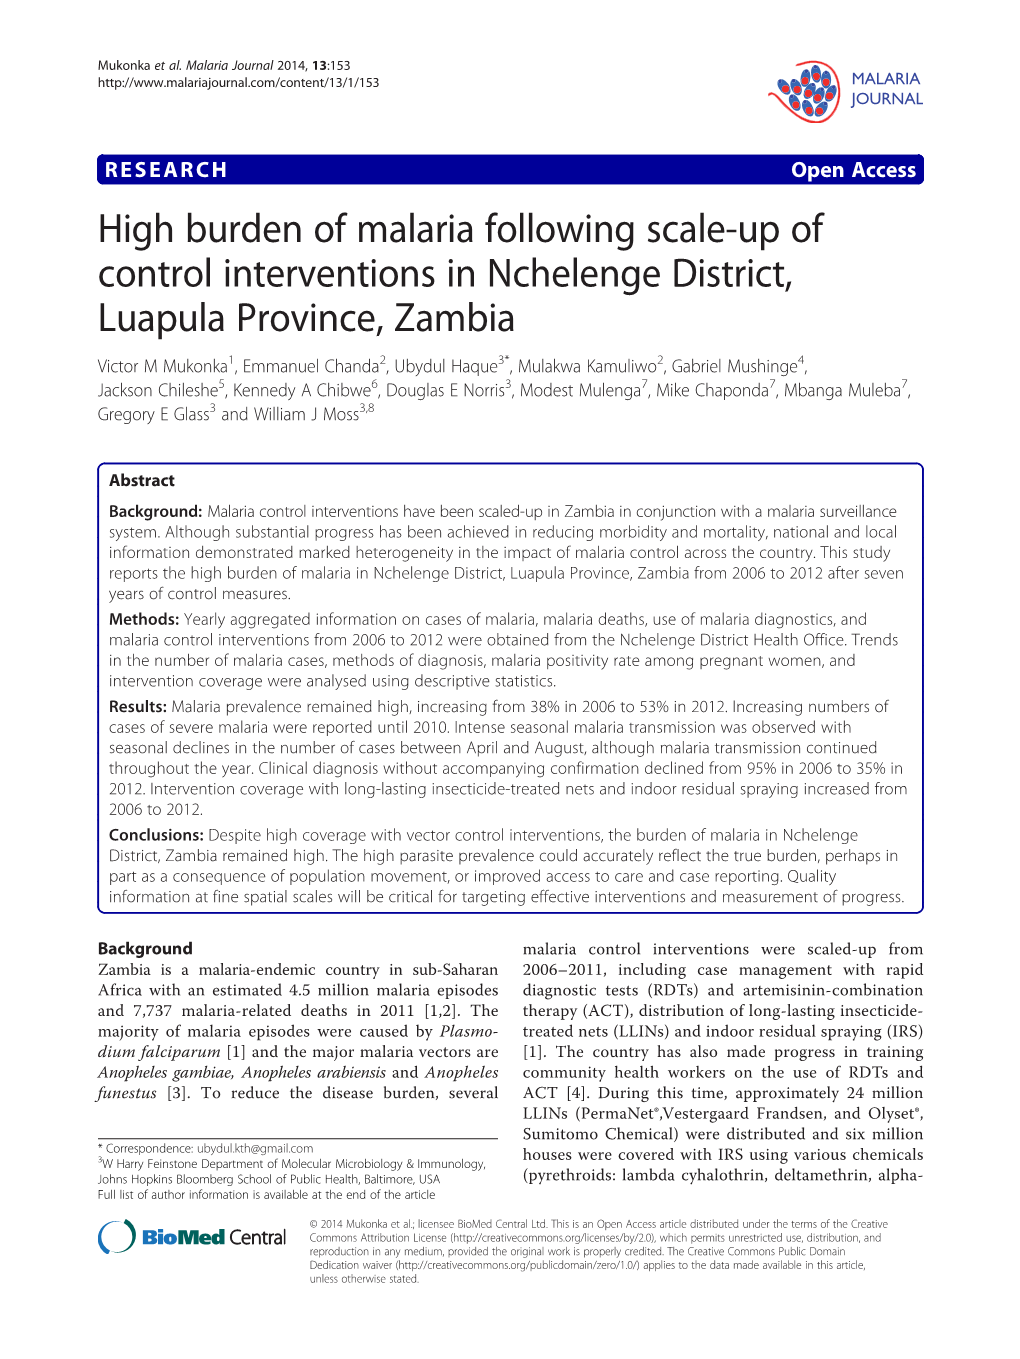 High Burden of Malaria Following Scale-Up of Control Interventions In